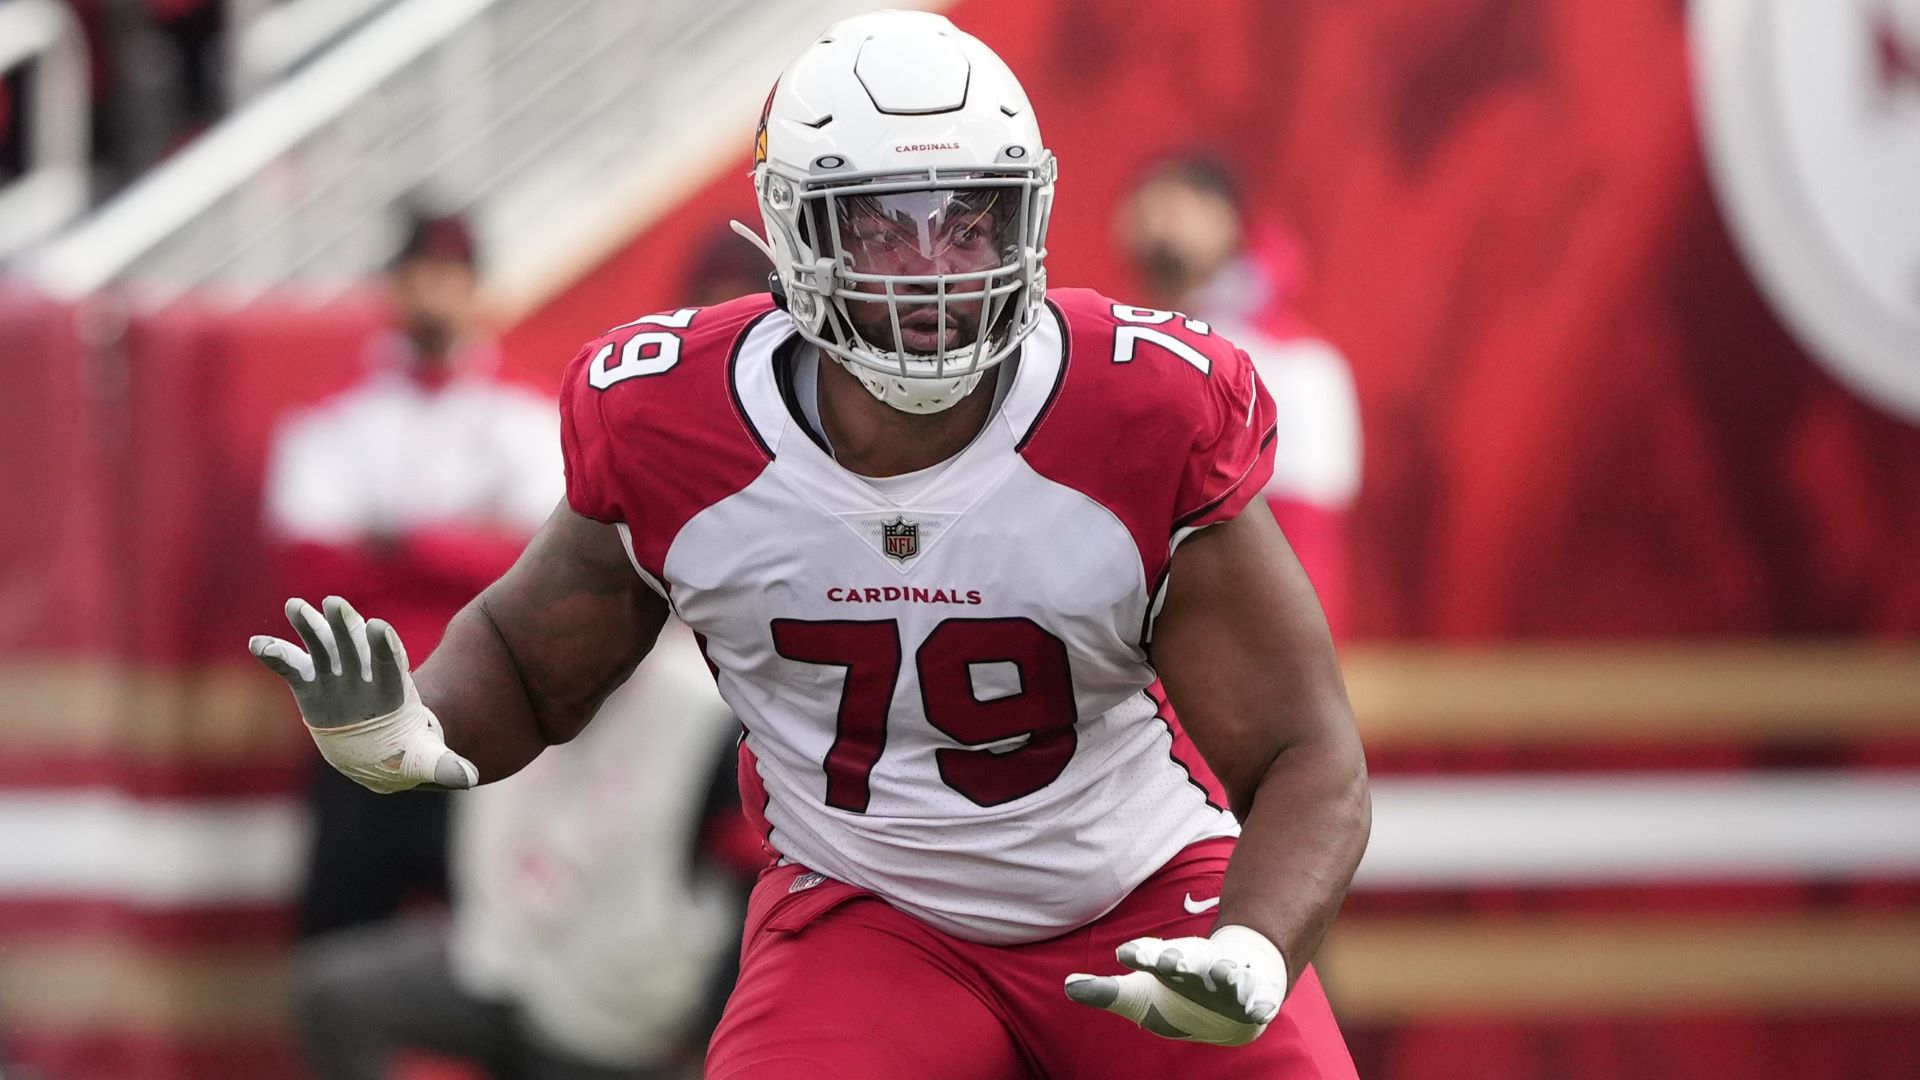 NFL.com Views This Offensive Tackle As Best Available After Trent
Brown Exit